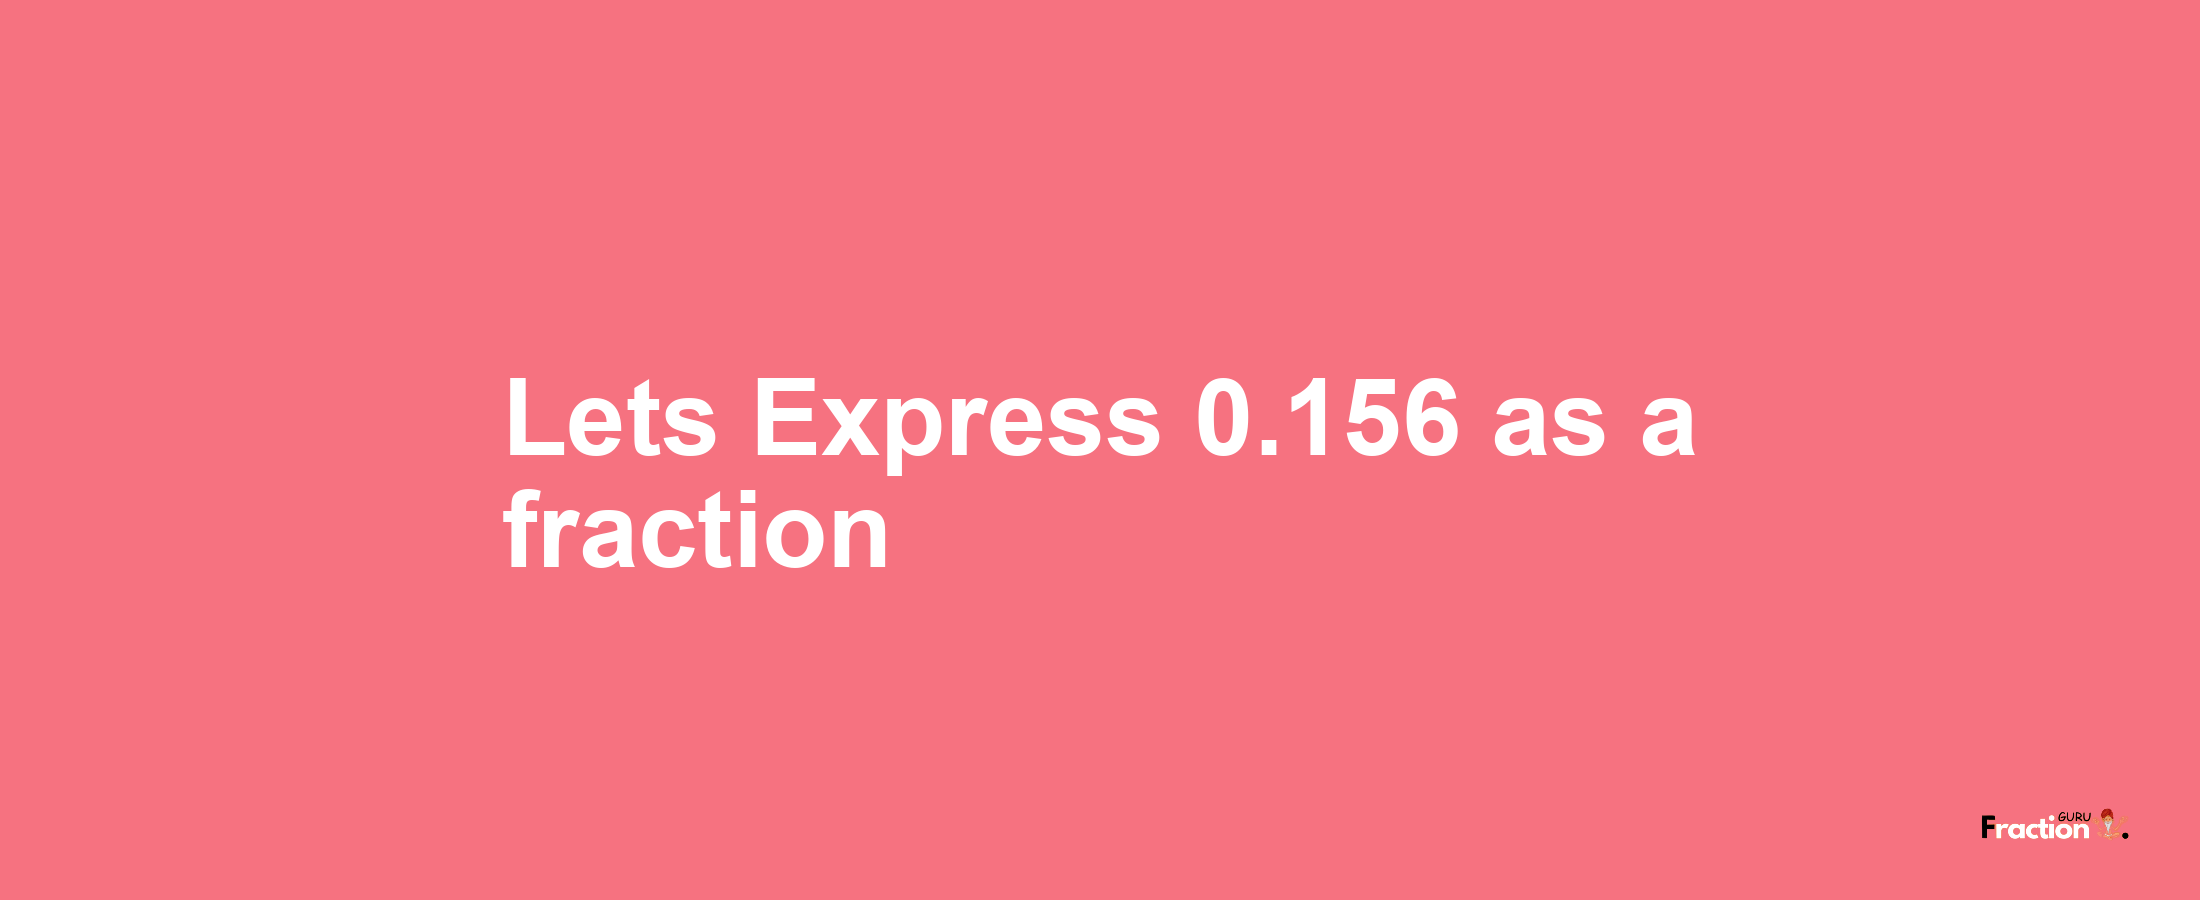 Lets Express 0.156 as afraction